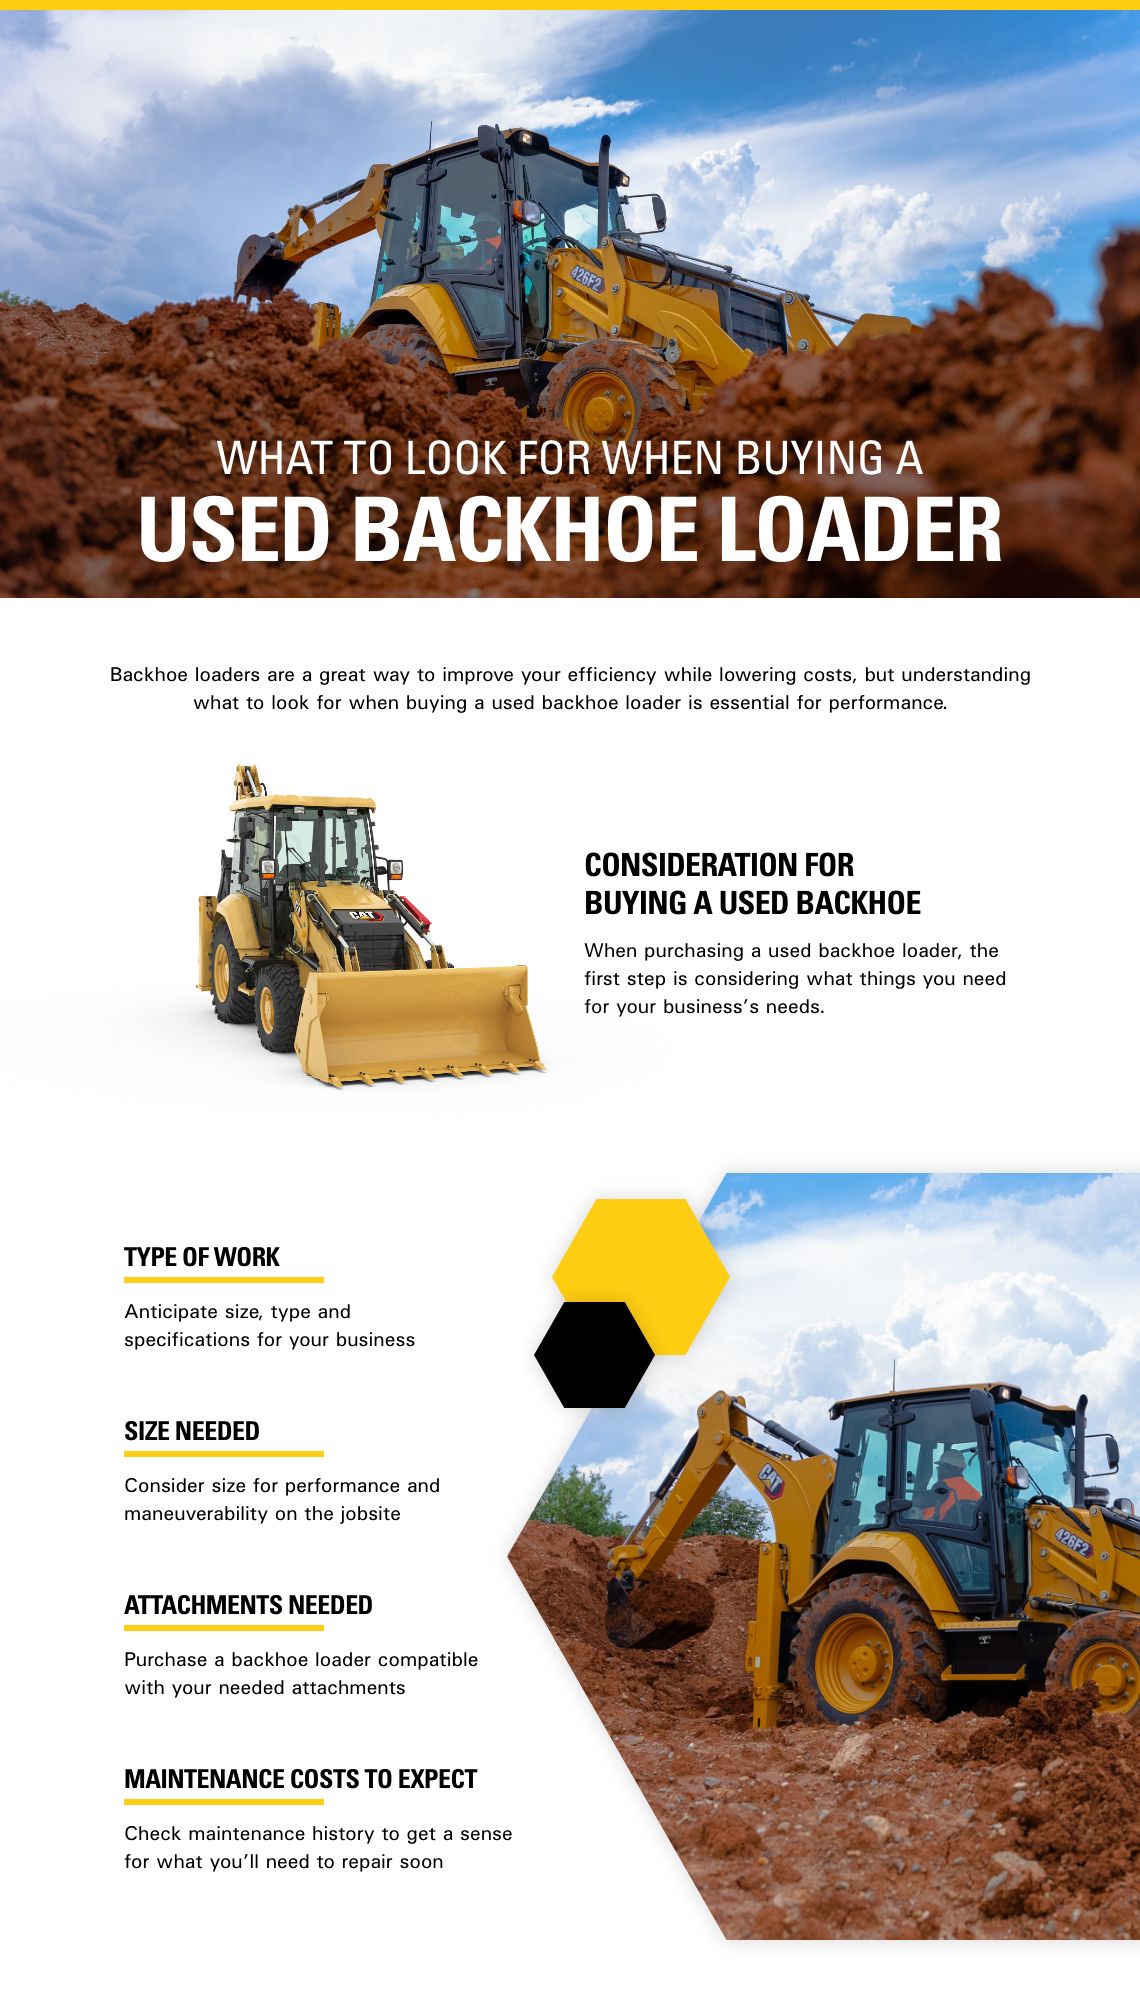 8 Tips & What to Look For When Buying a Used Backhoe Loader